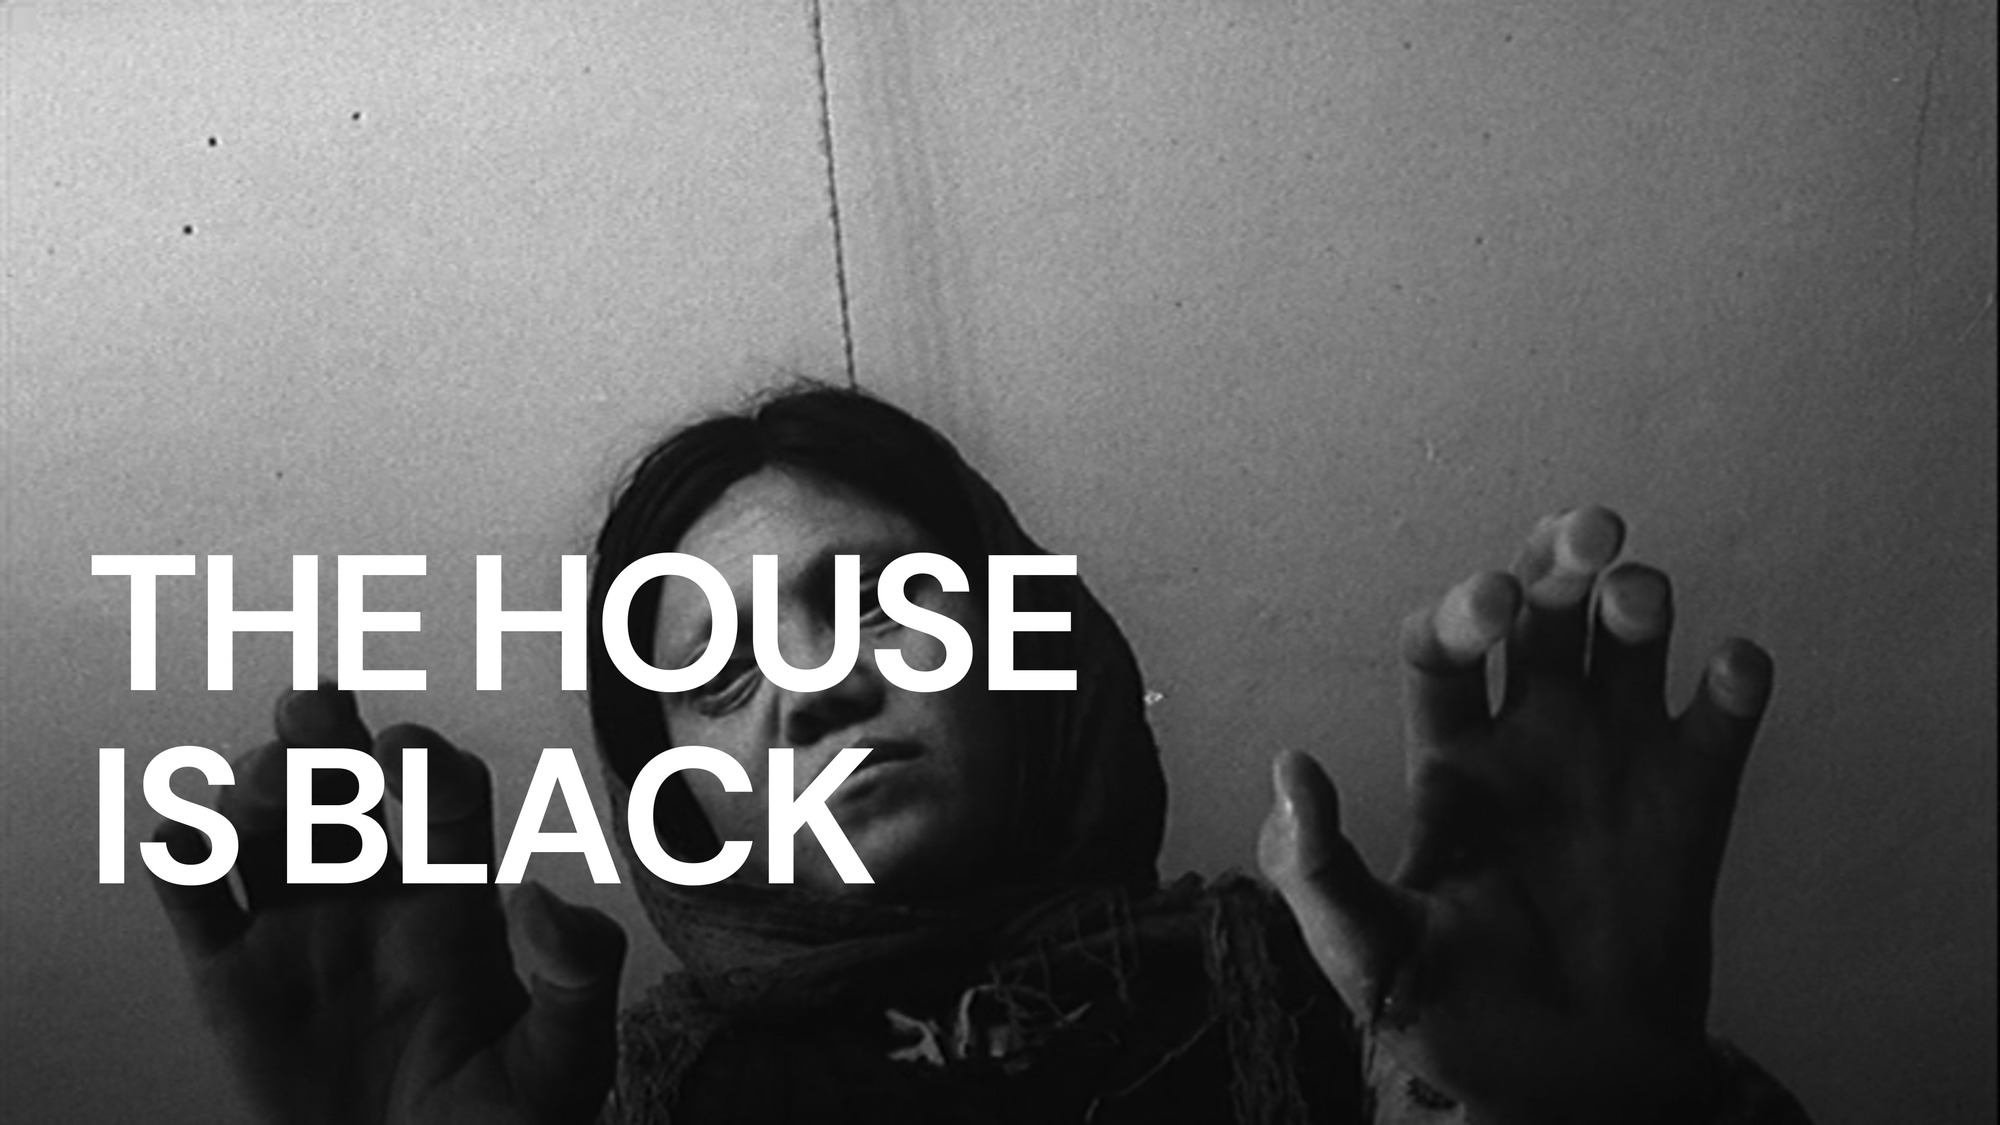 33-facts-about-the-movie-the-house-is-black